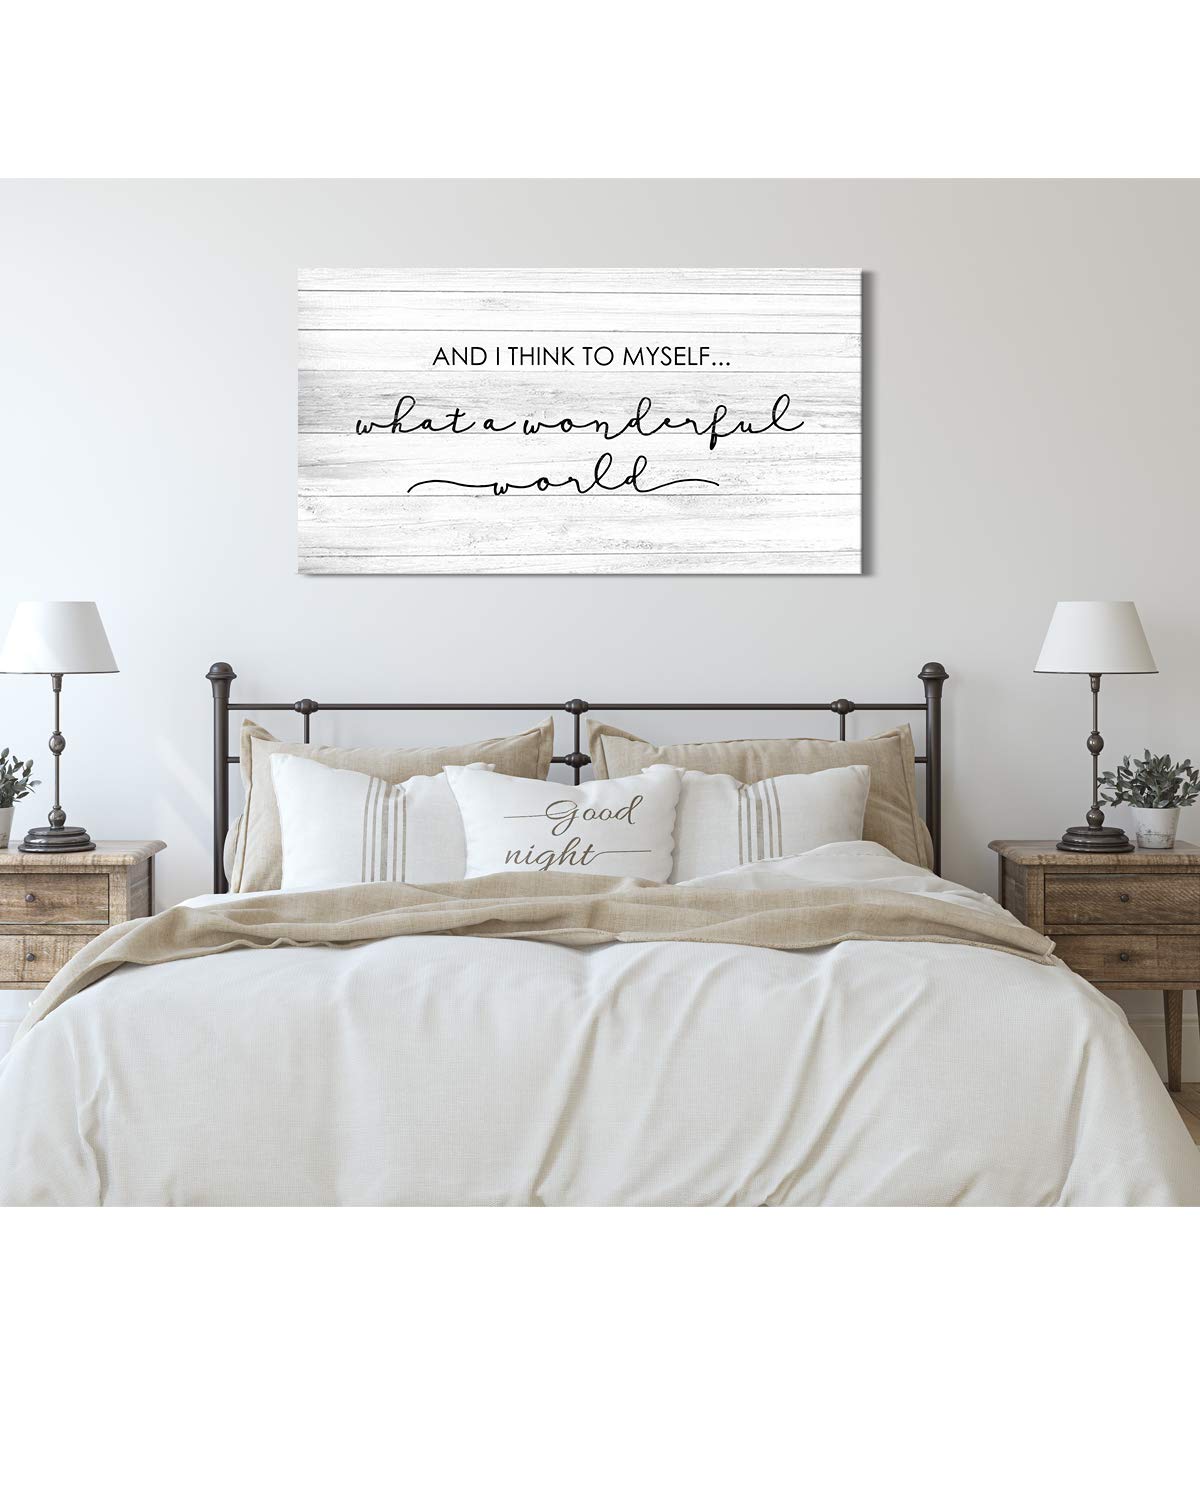 What A Wonderful World Wall Decor Art Canvas with Grey Woodgrain Background (Not Printed on Wood) - Ready to Hang - Great for above a couch, table, bed or more